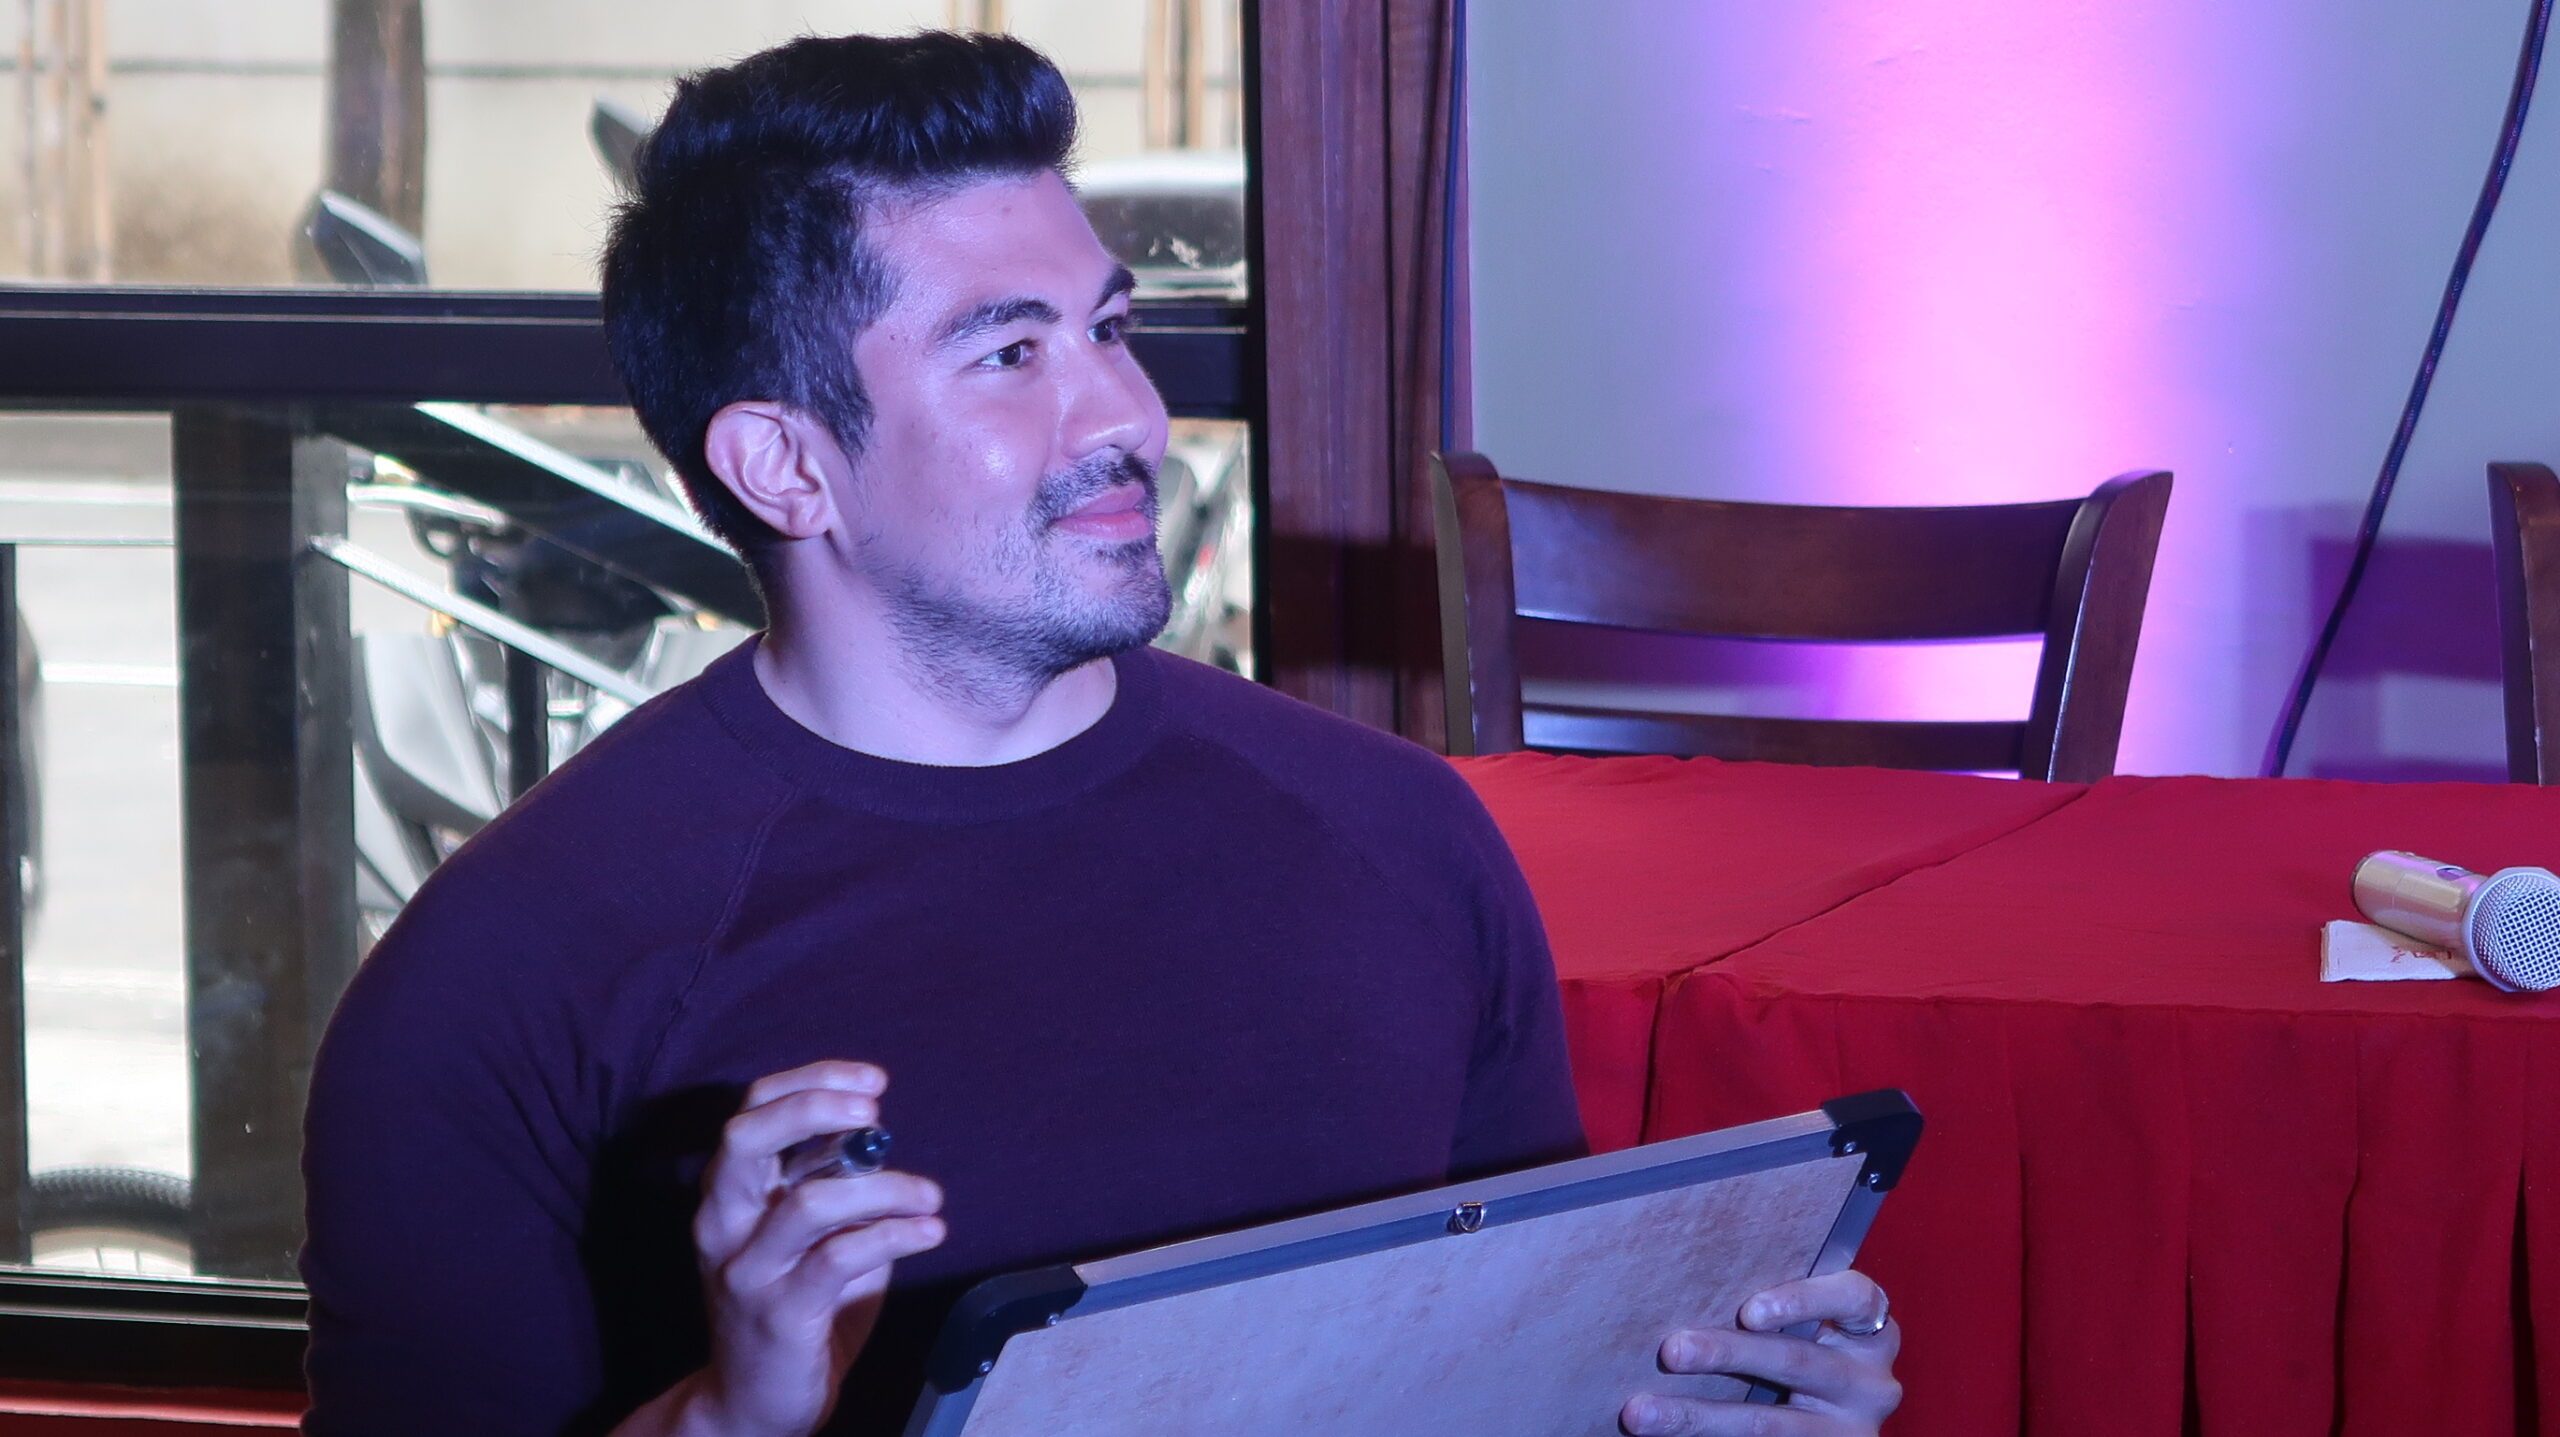 Luis Manzano ‘ready’ to settle down anytime